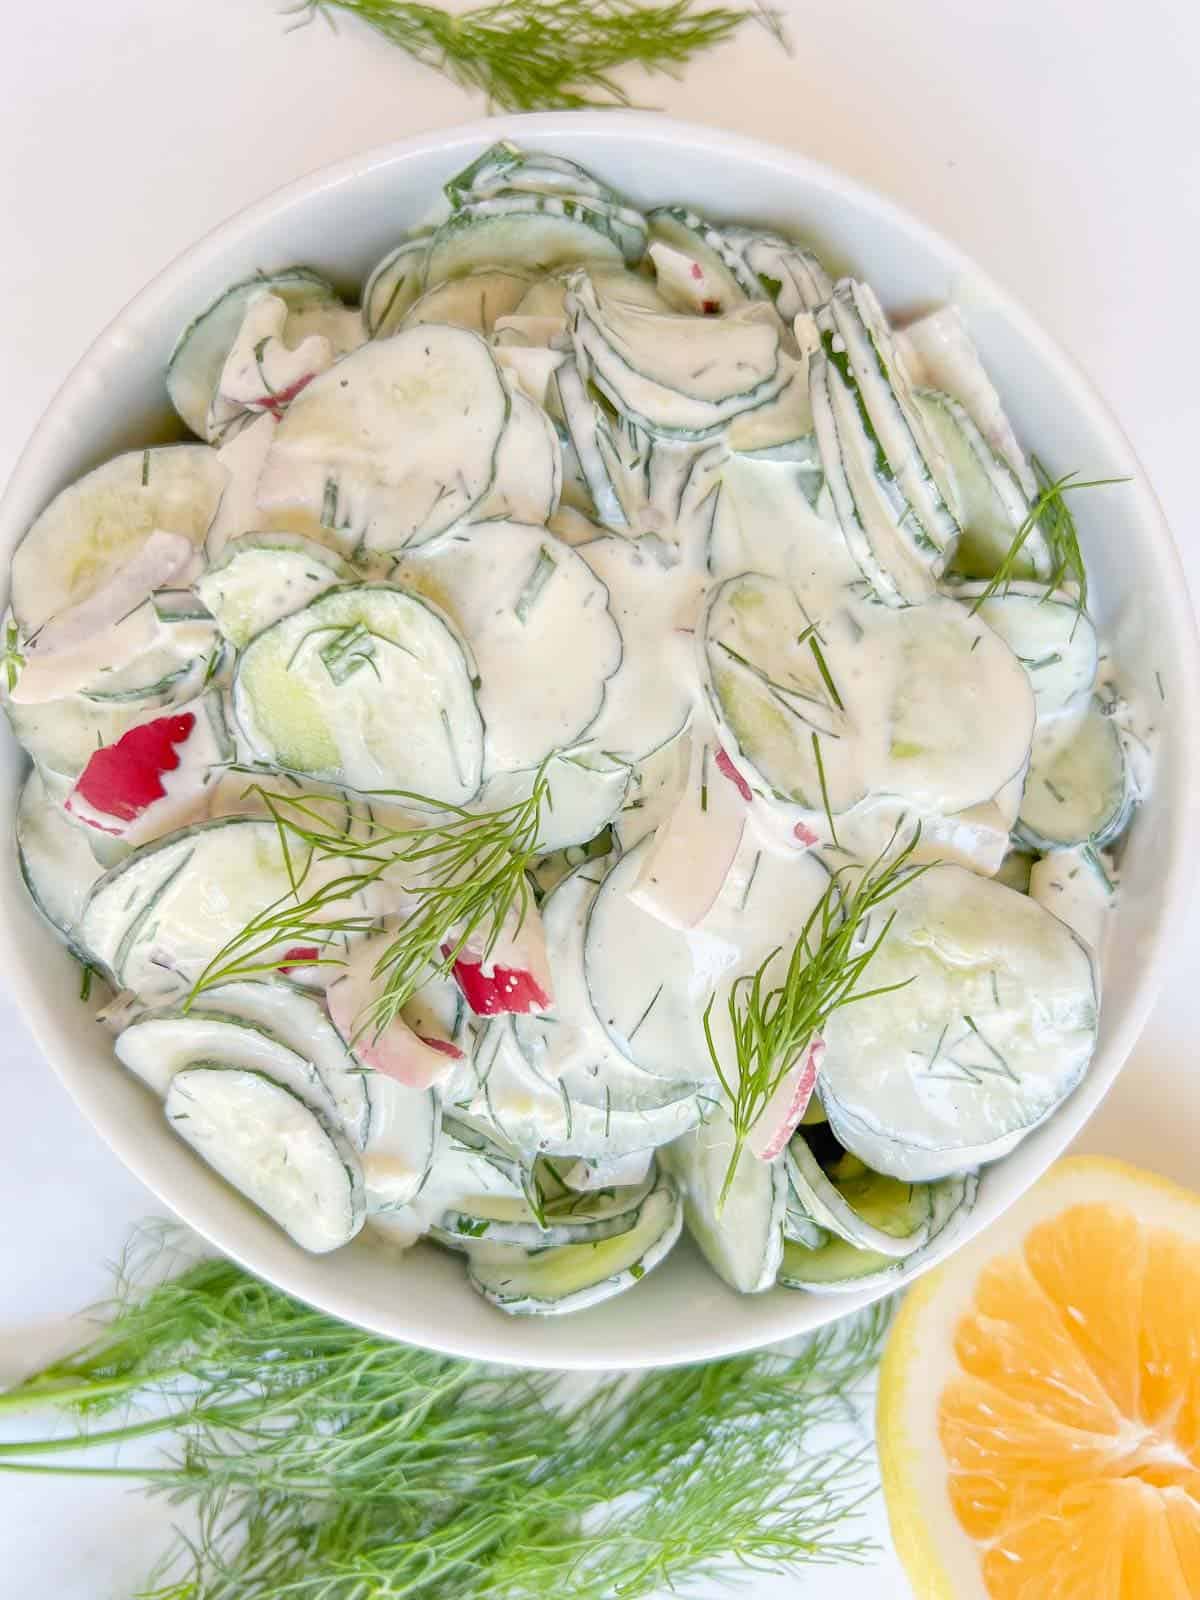 creamy cucumber salad with a sour cream and dill dressing